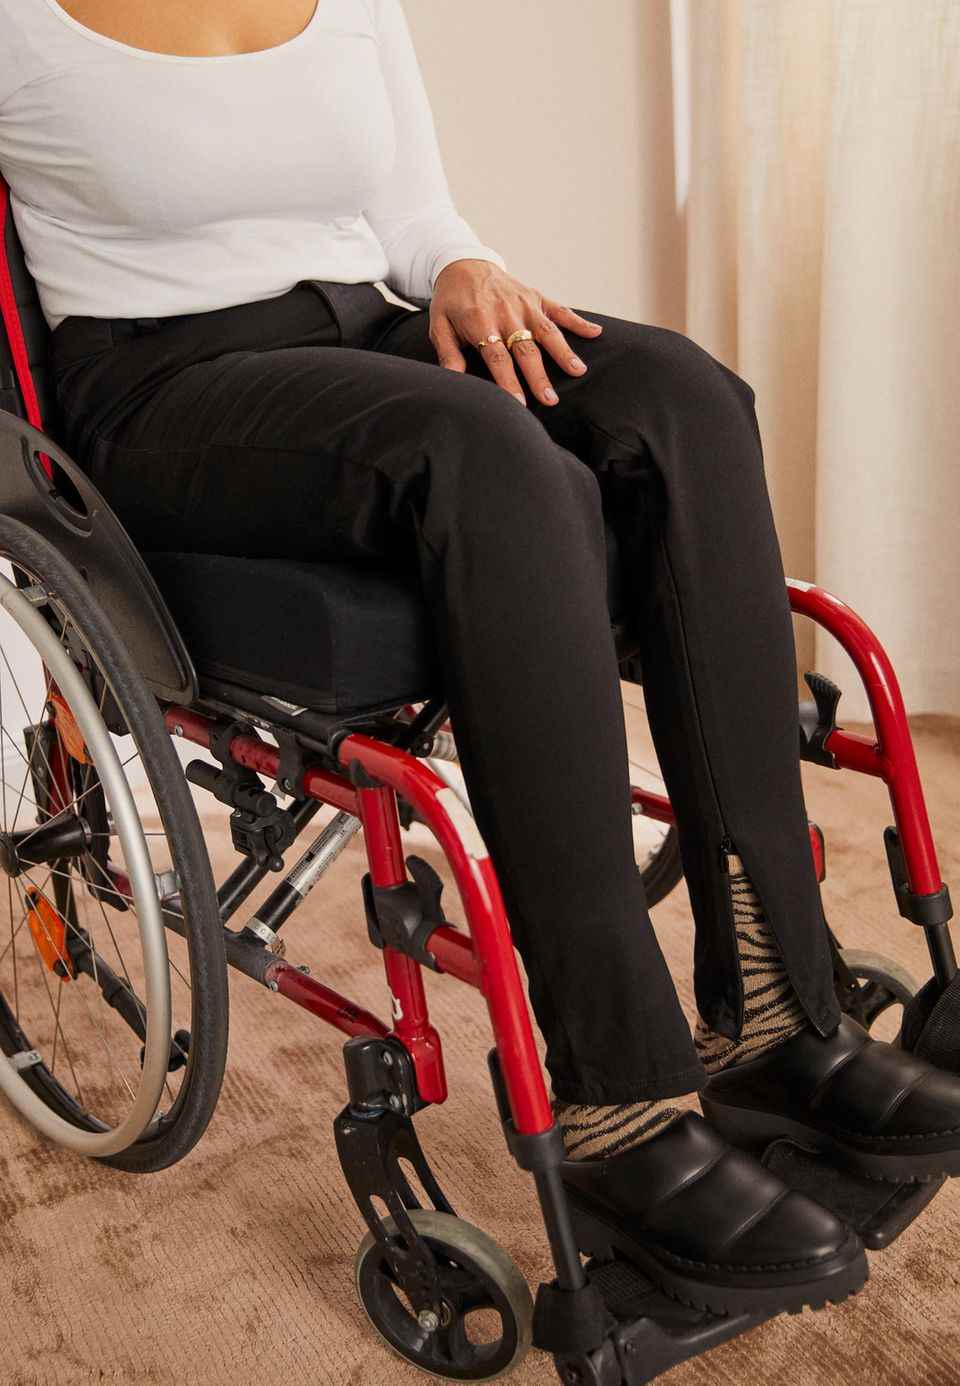 Zalando's adaptive collections are designed to be easier to use for people with permanent or temporary disabilities. 